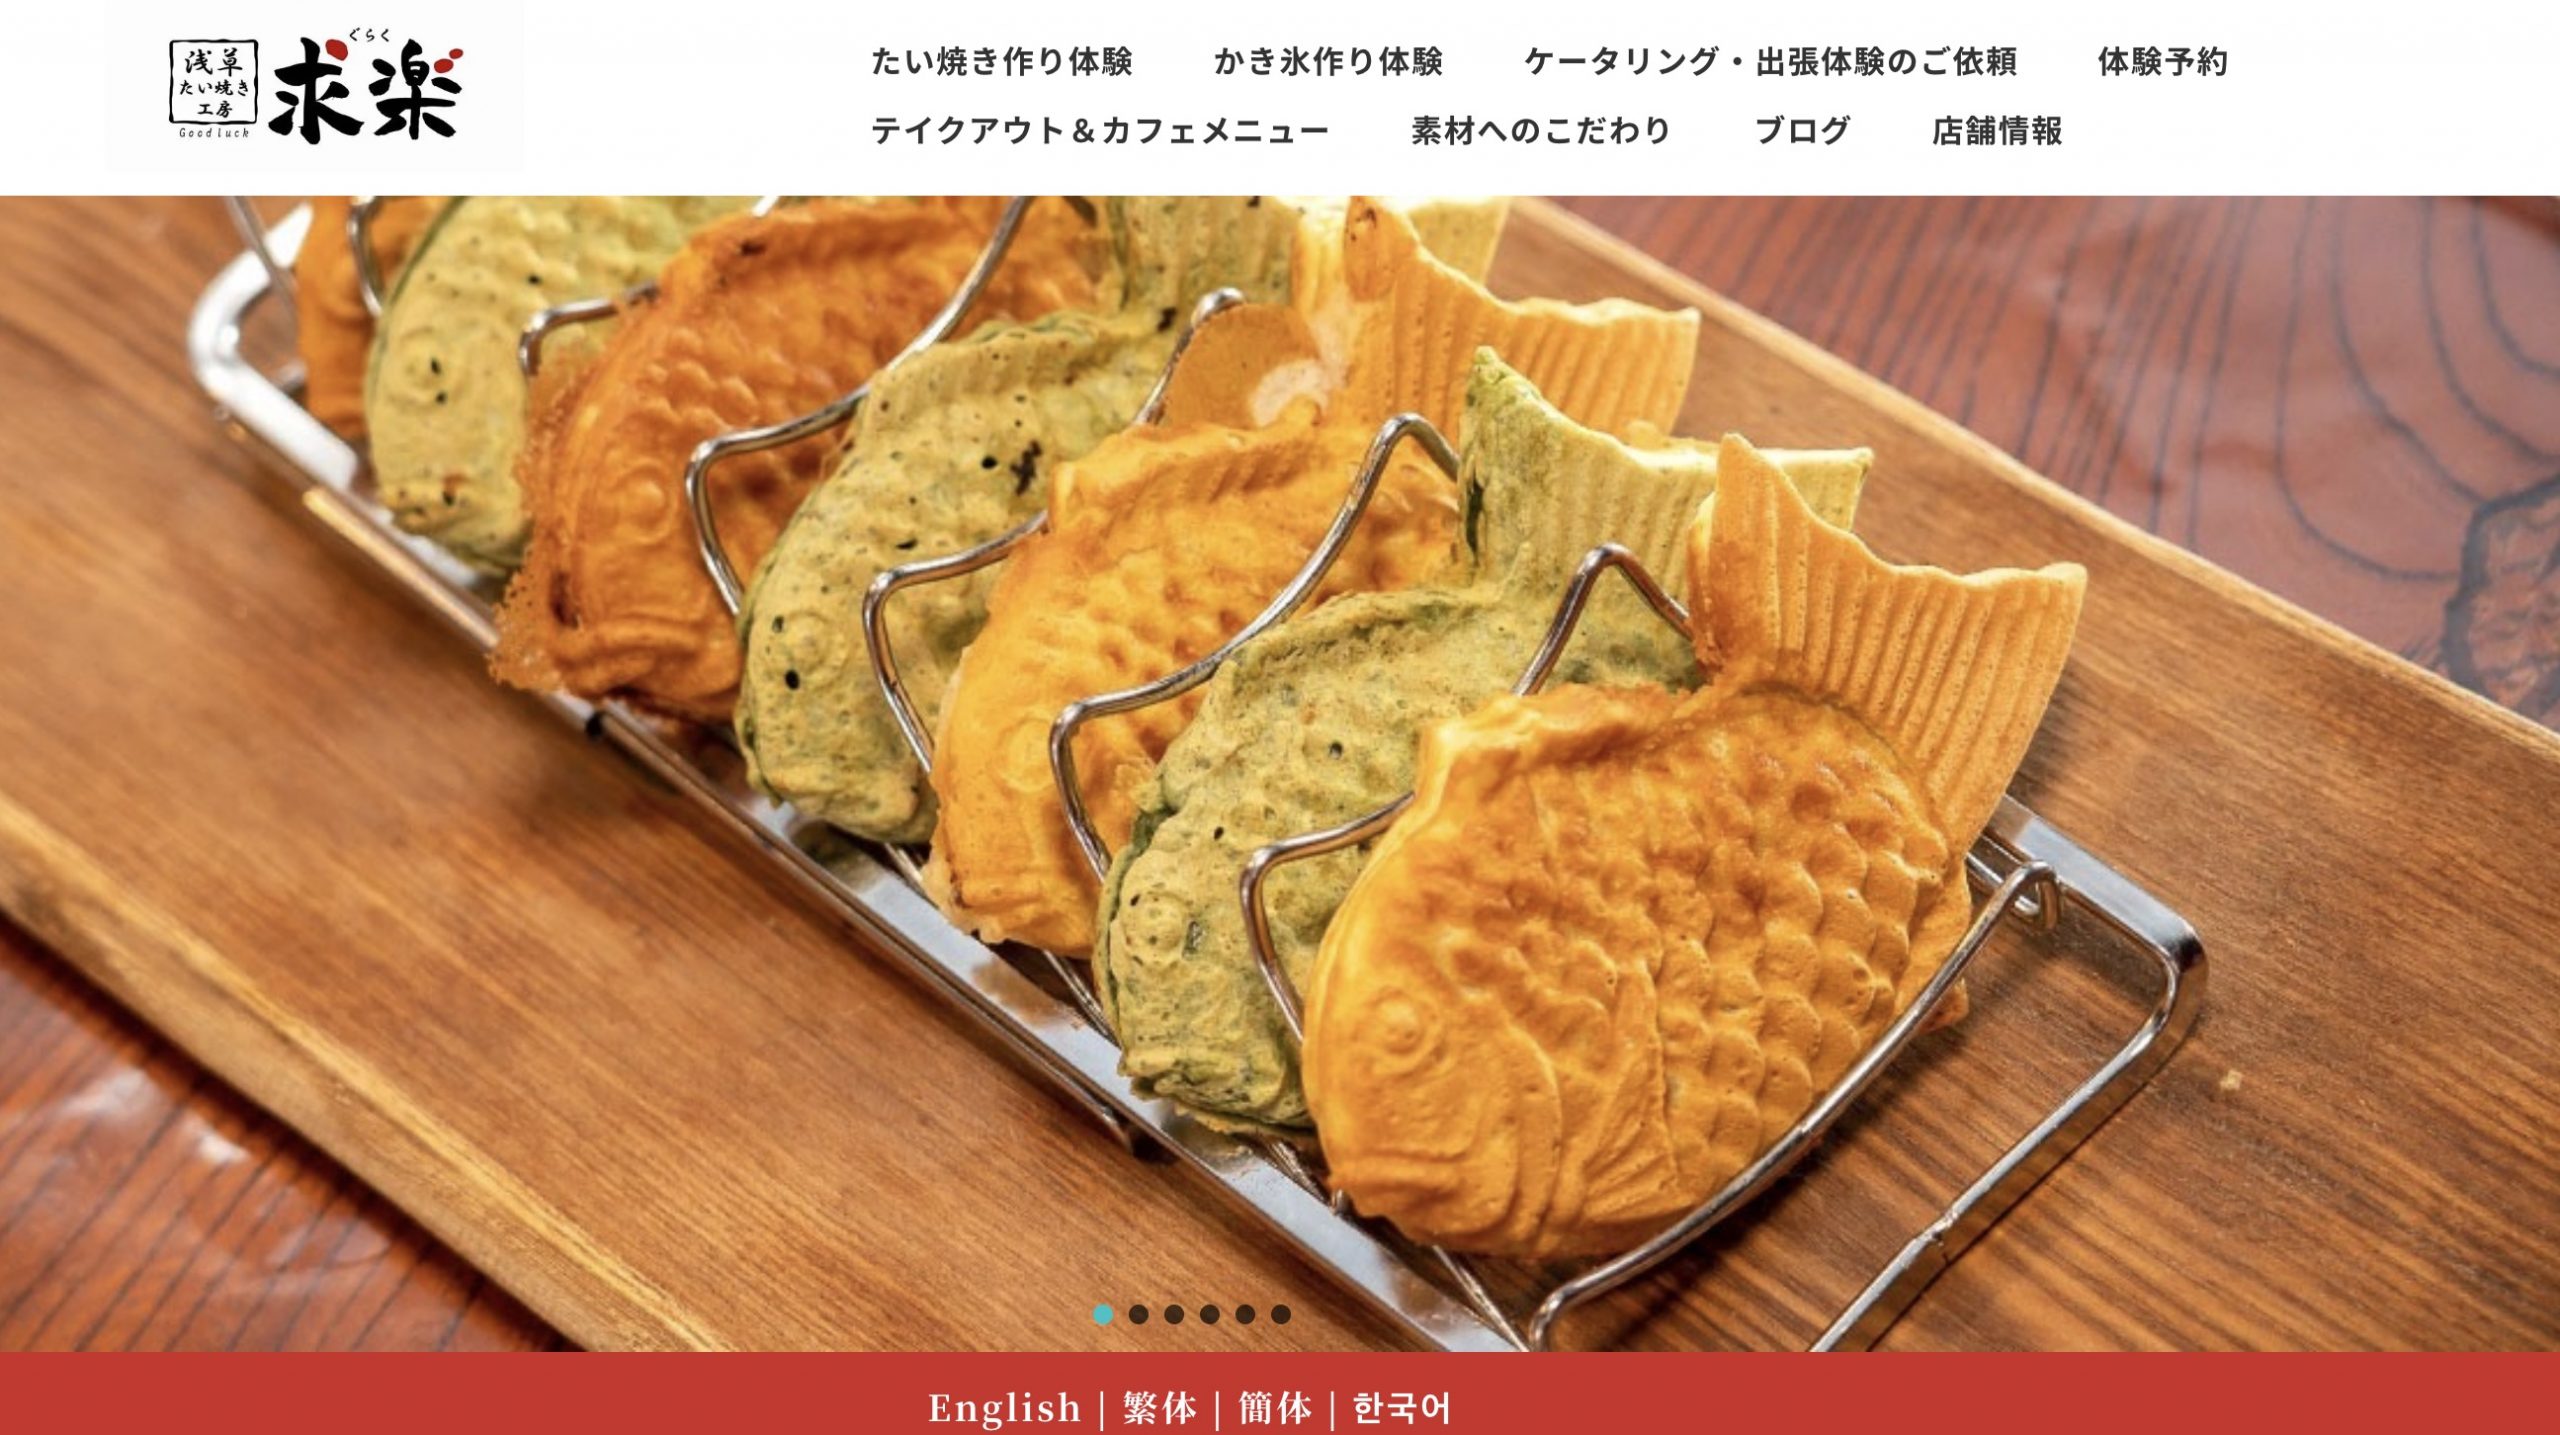 Read more about the article 【制作実績】浅草たい焼き工房「求楽」ホームページ